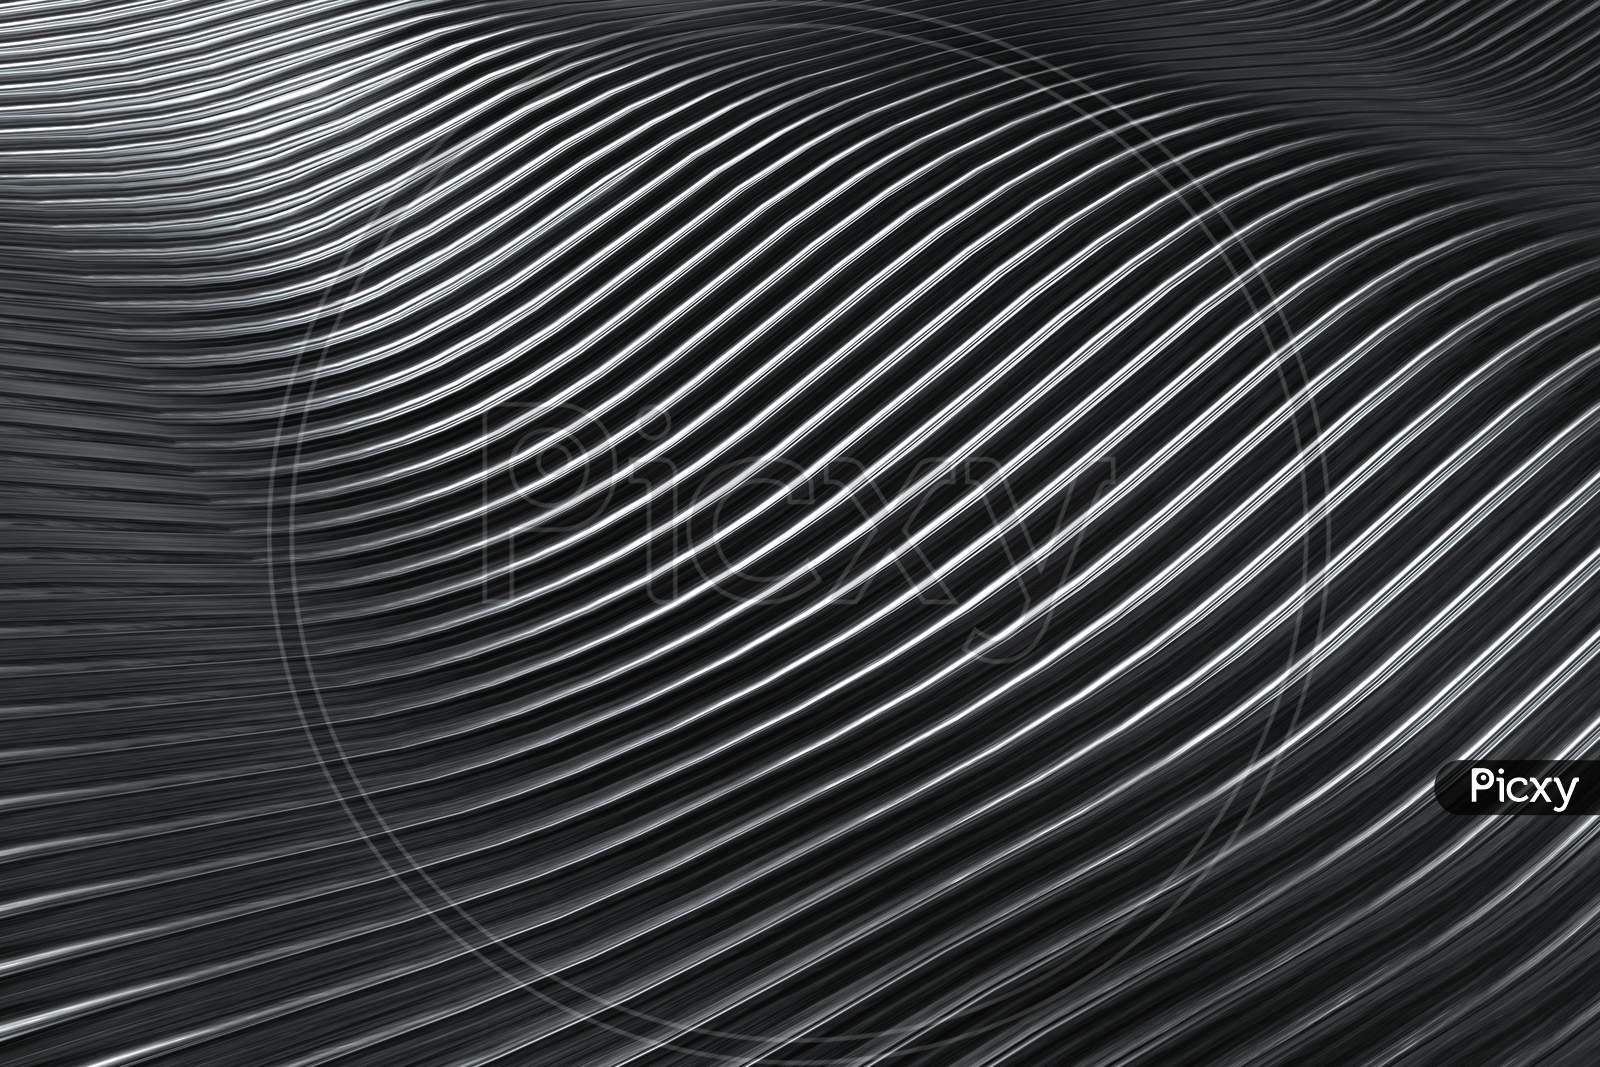 3D Rendering Closeup Abstract Black Silver And White Stripe Slicing Wavy Background. Minimalism Illustration Concept. Graphic Design Wallpaper And Backdrop